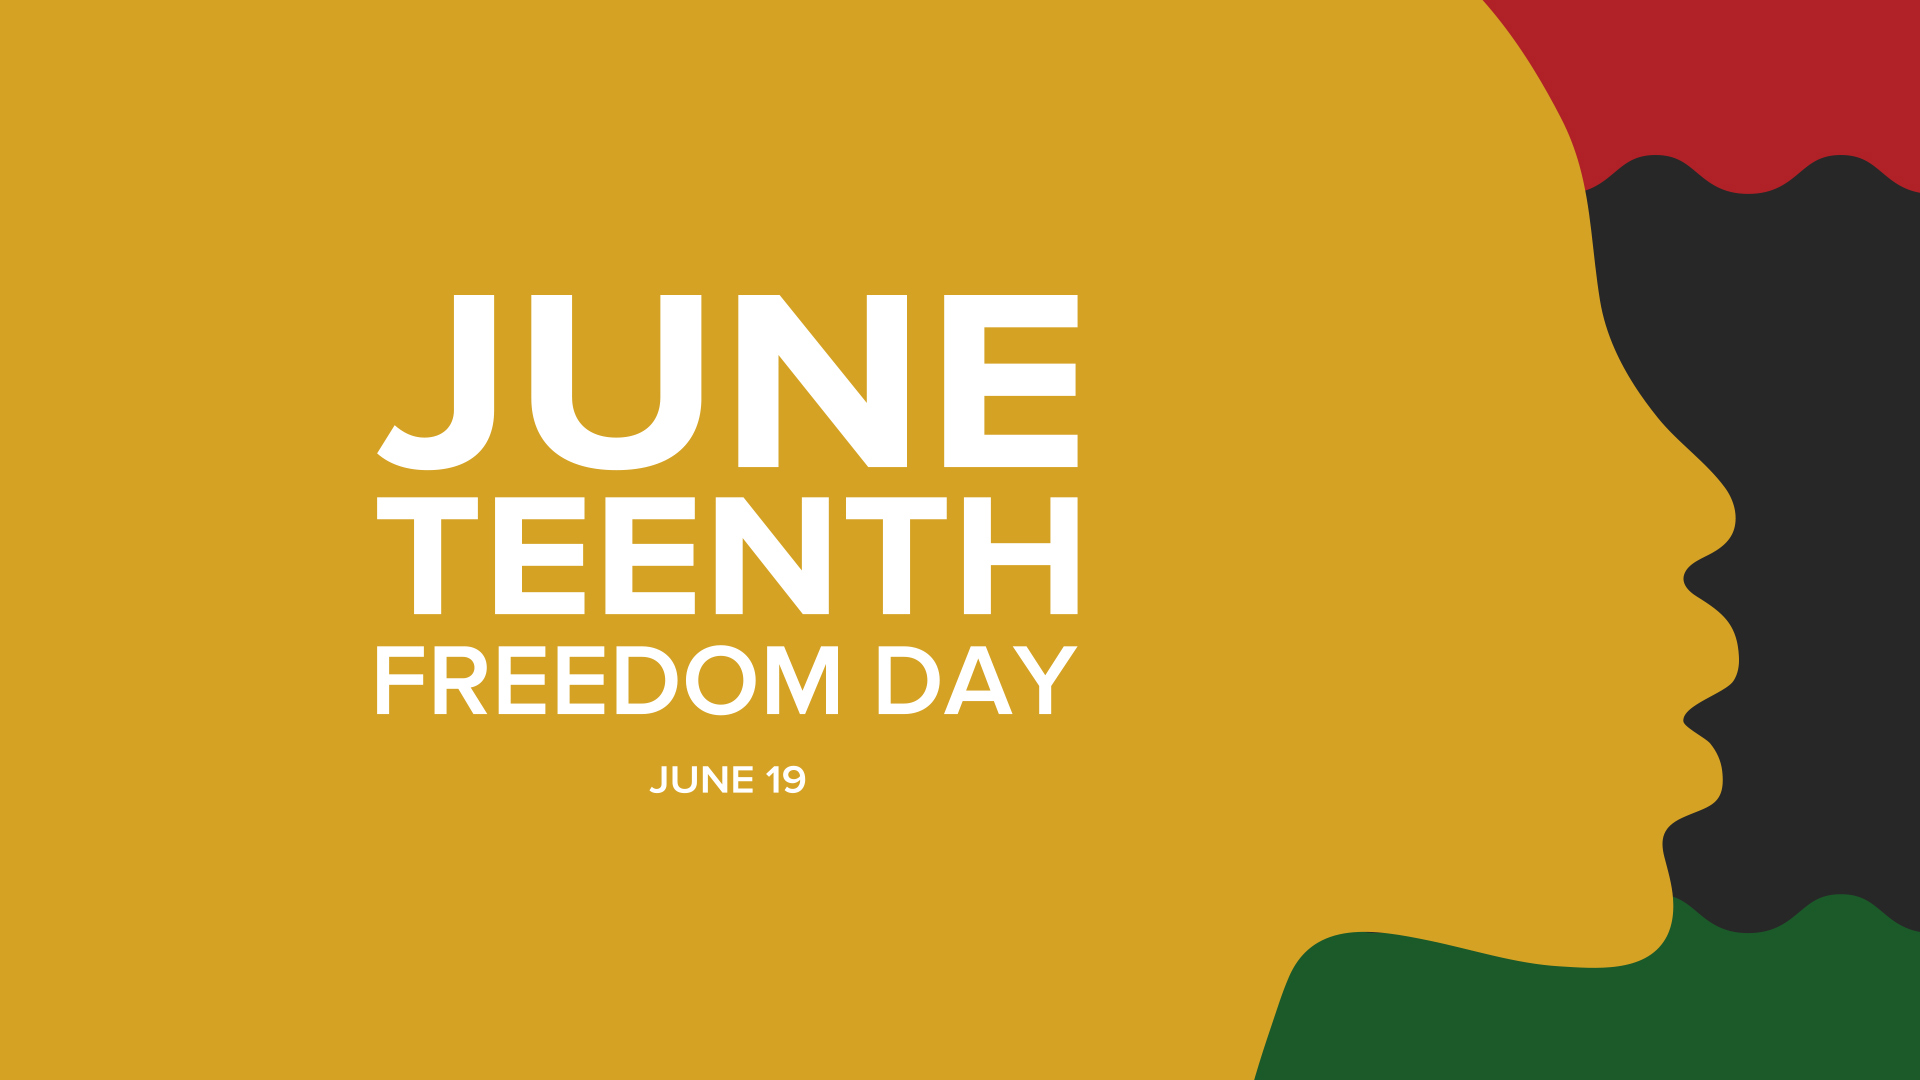 Juneteenth Freedom Day June 19 poster with gold silhouetted face and red, black and green wavy stripes